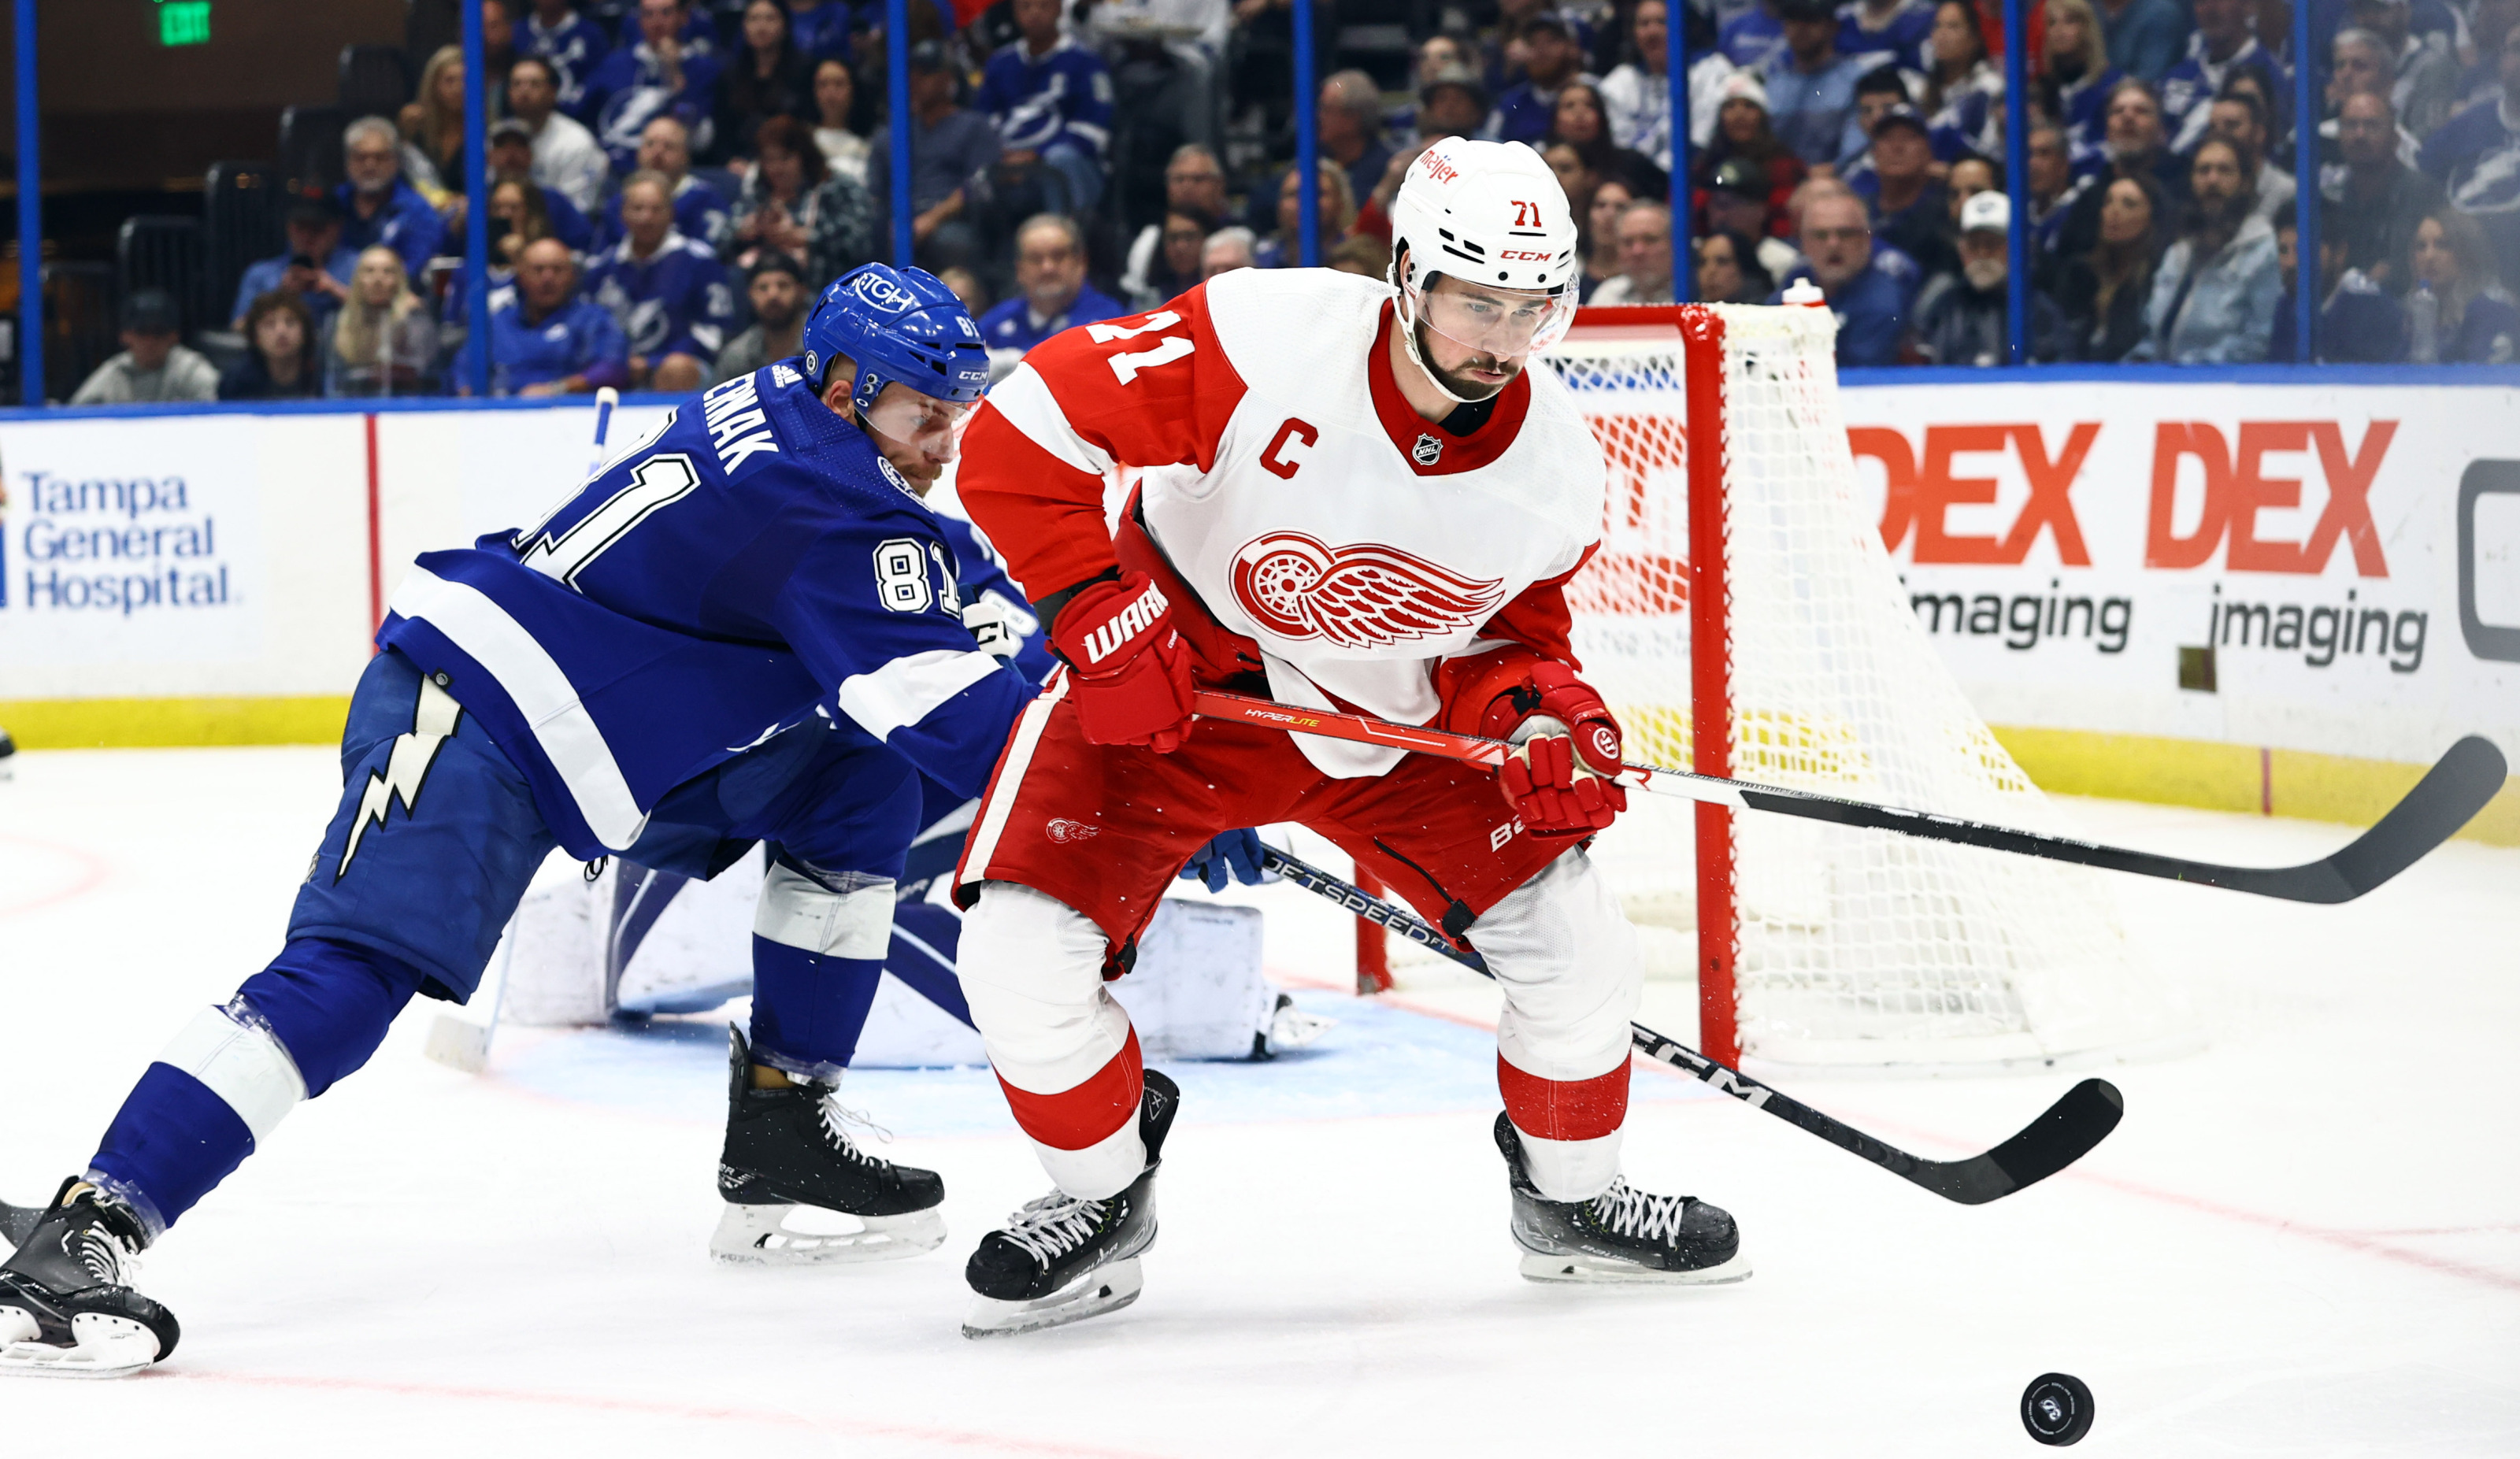 Lightning bring 4-game losing streak into matchup with the Red Wings